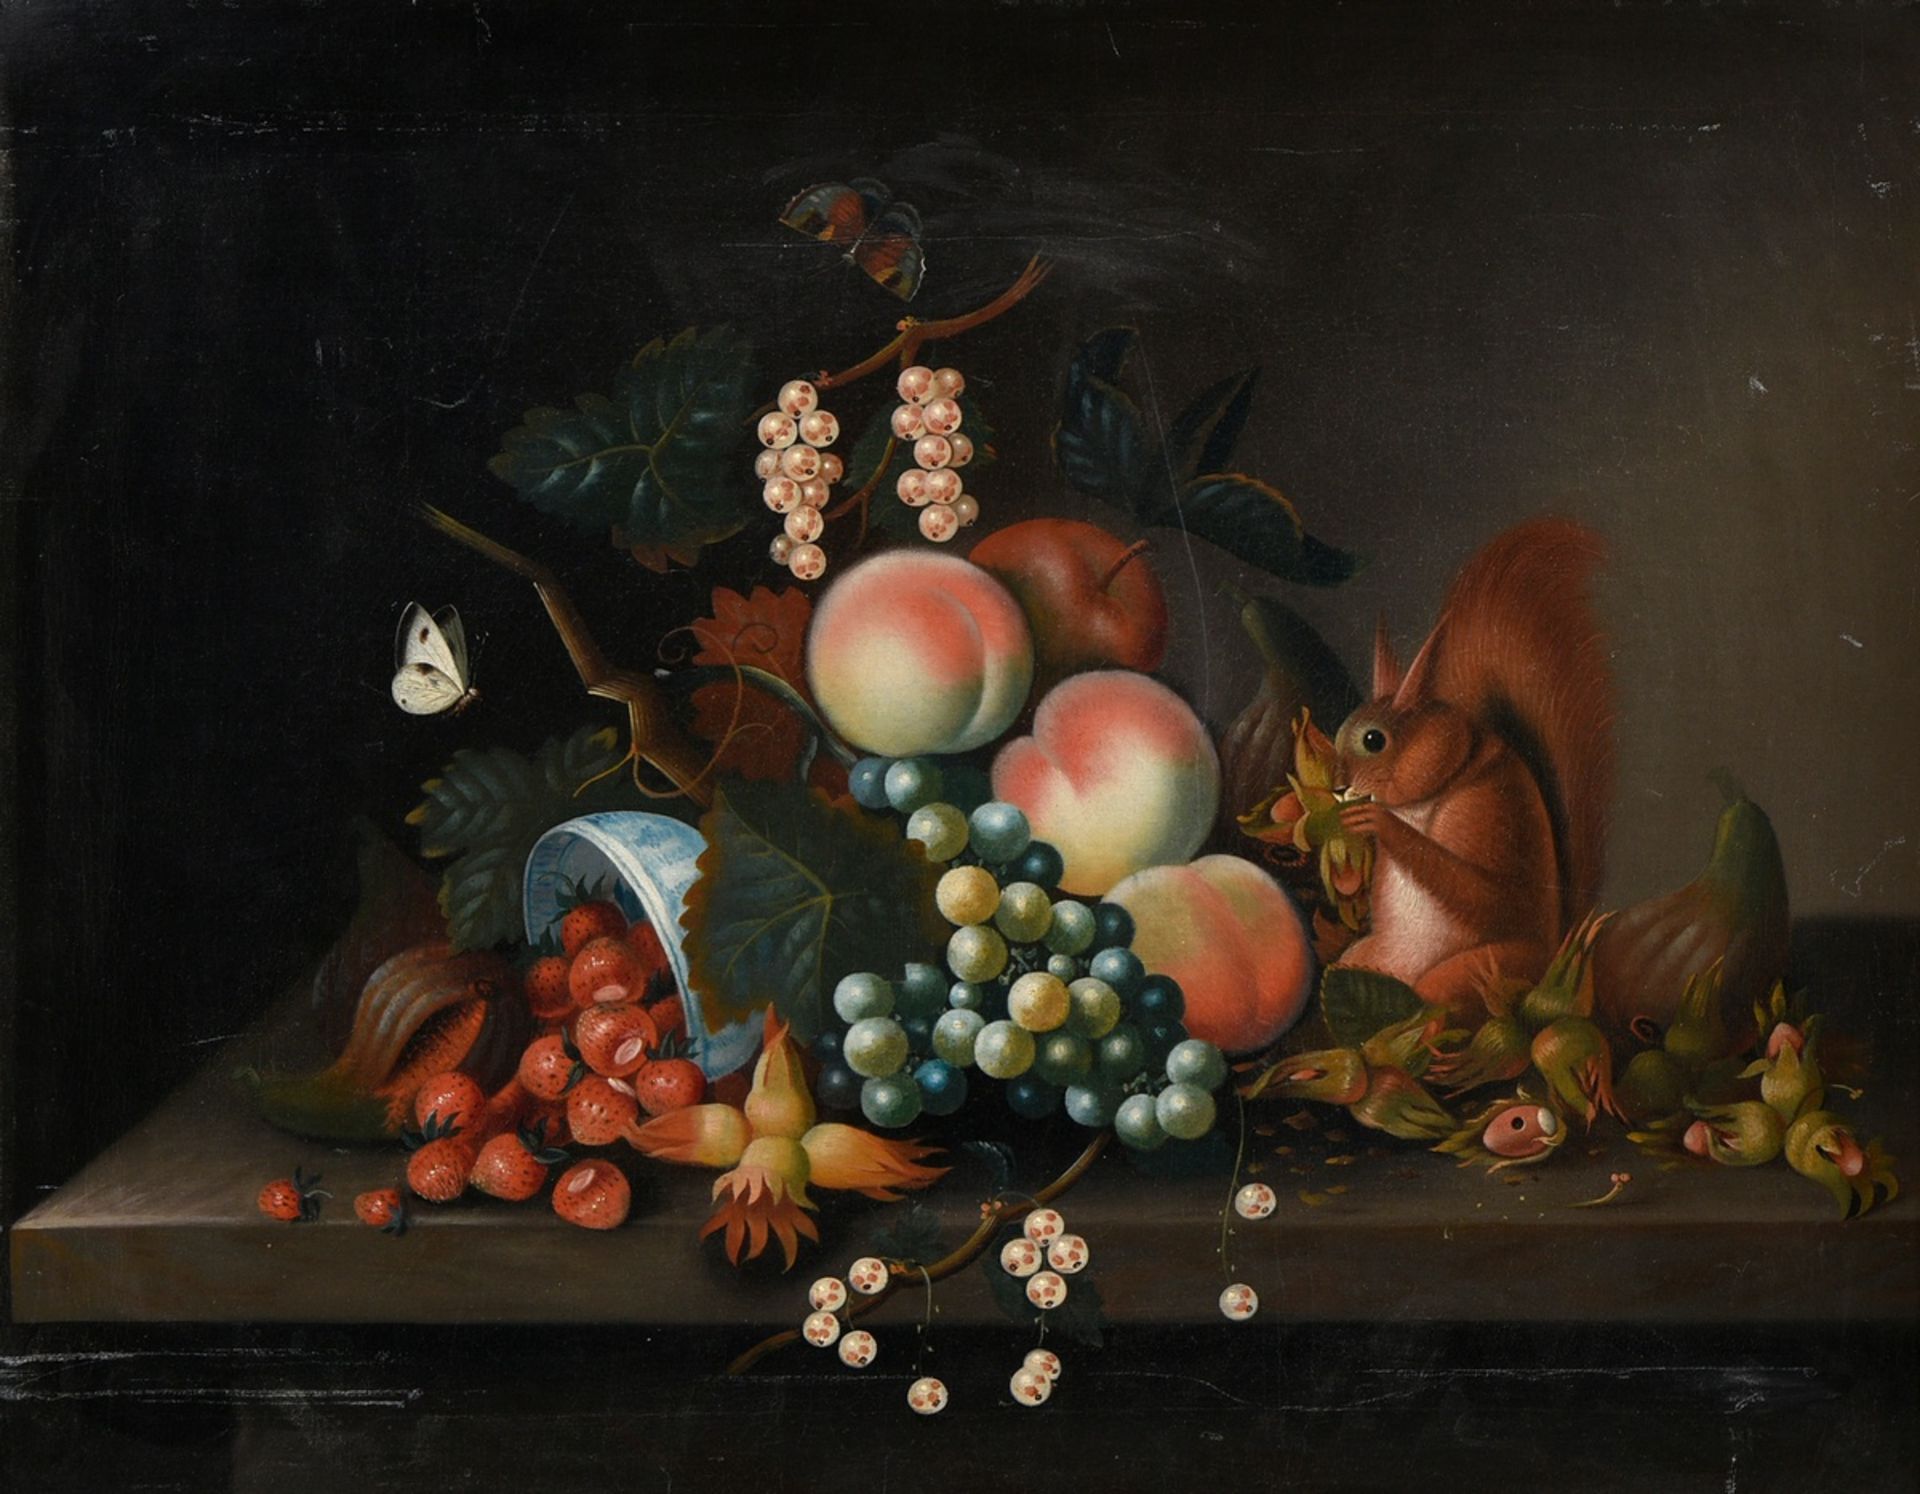 Stranovius, Tobias (1684-1756) Succession "Still Life of Fruit with Butterflies and Squirrels", oil